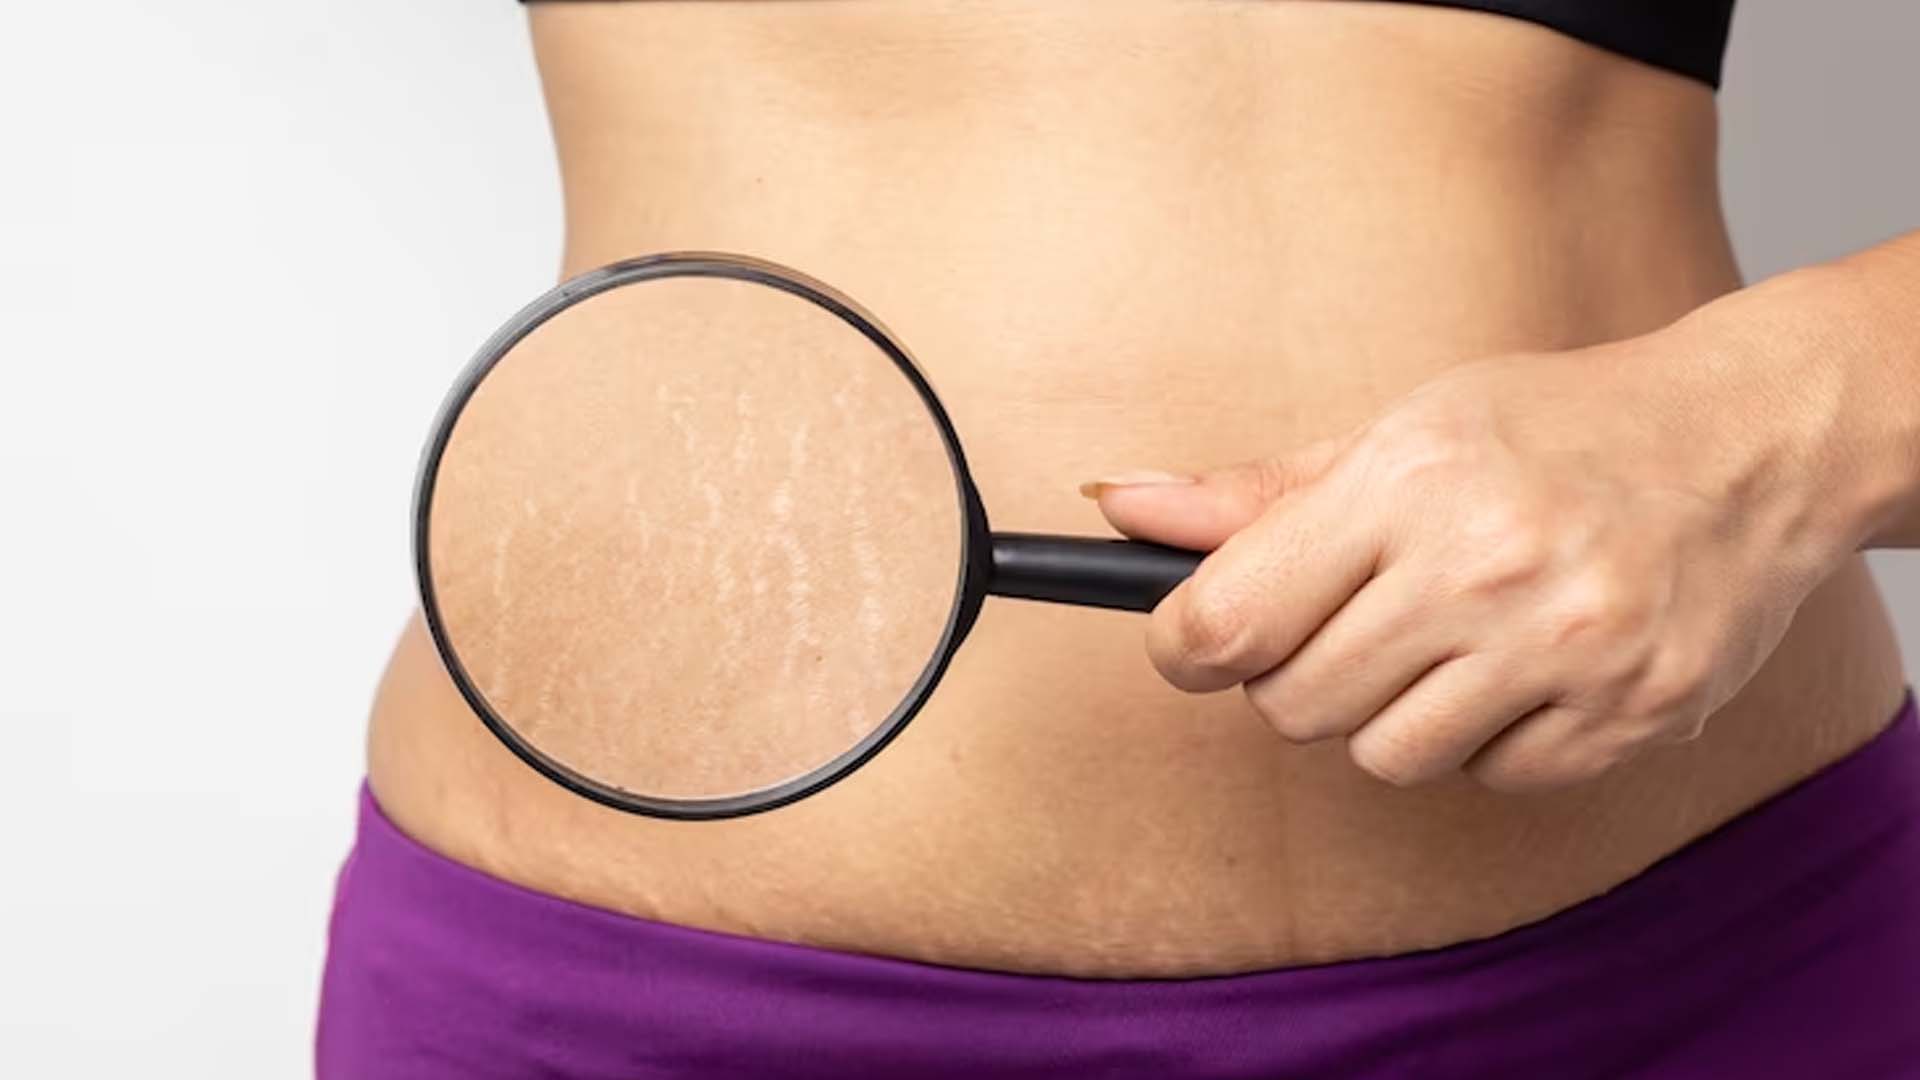 What are the Home Remedies for Stretch Marks?